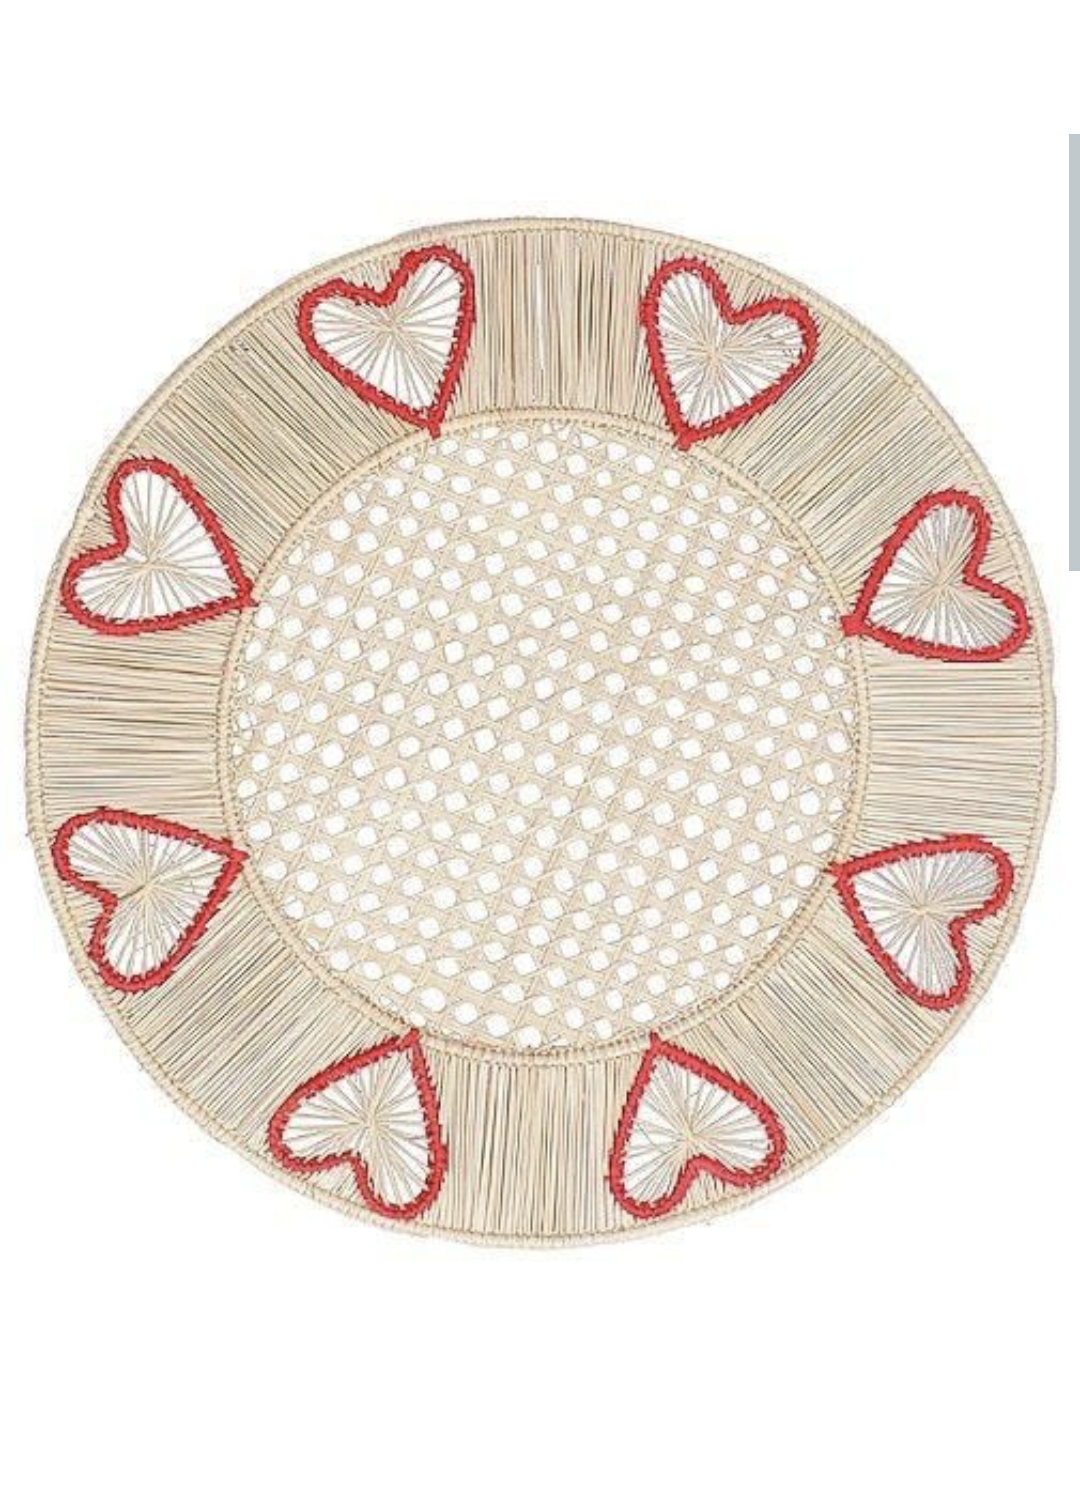 Valentine Hearts Iraca Woven Placemat